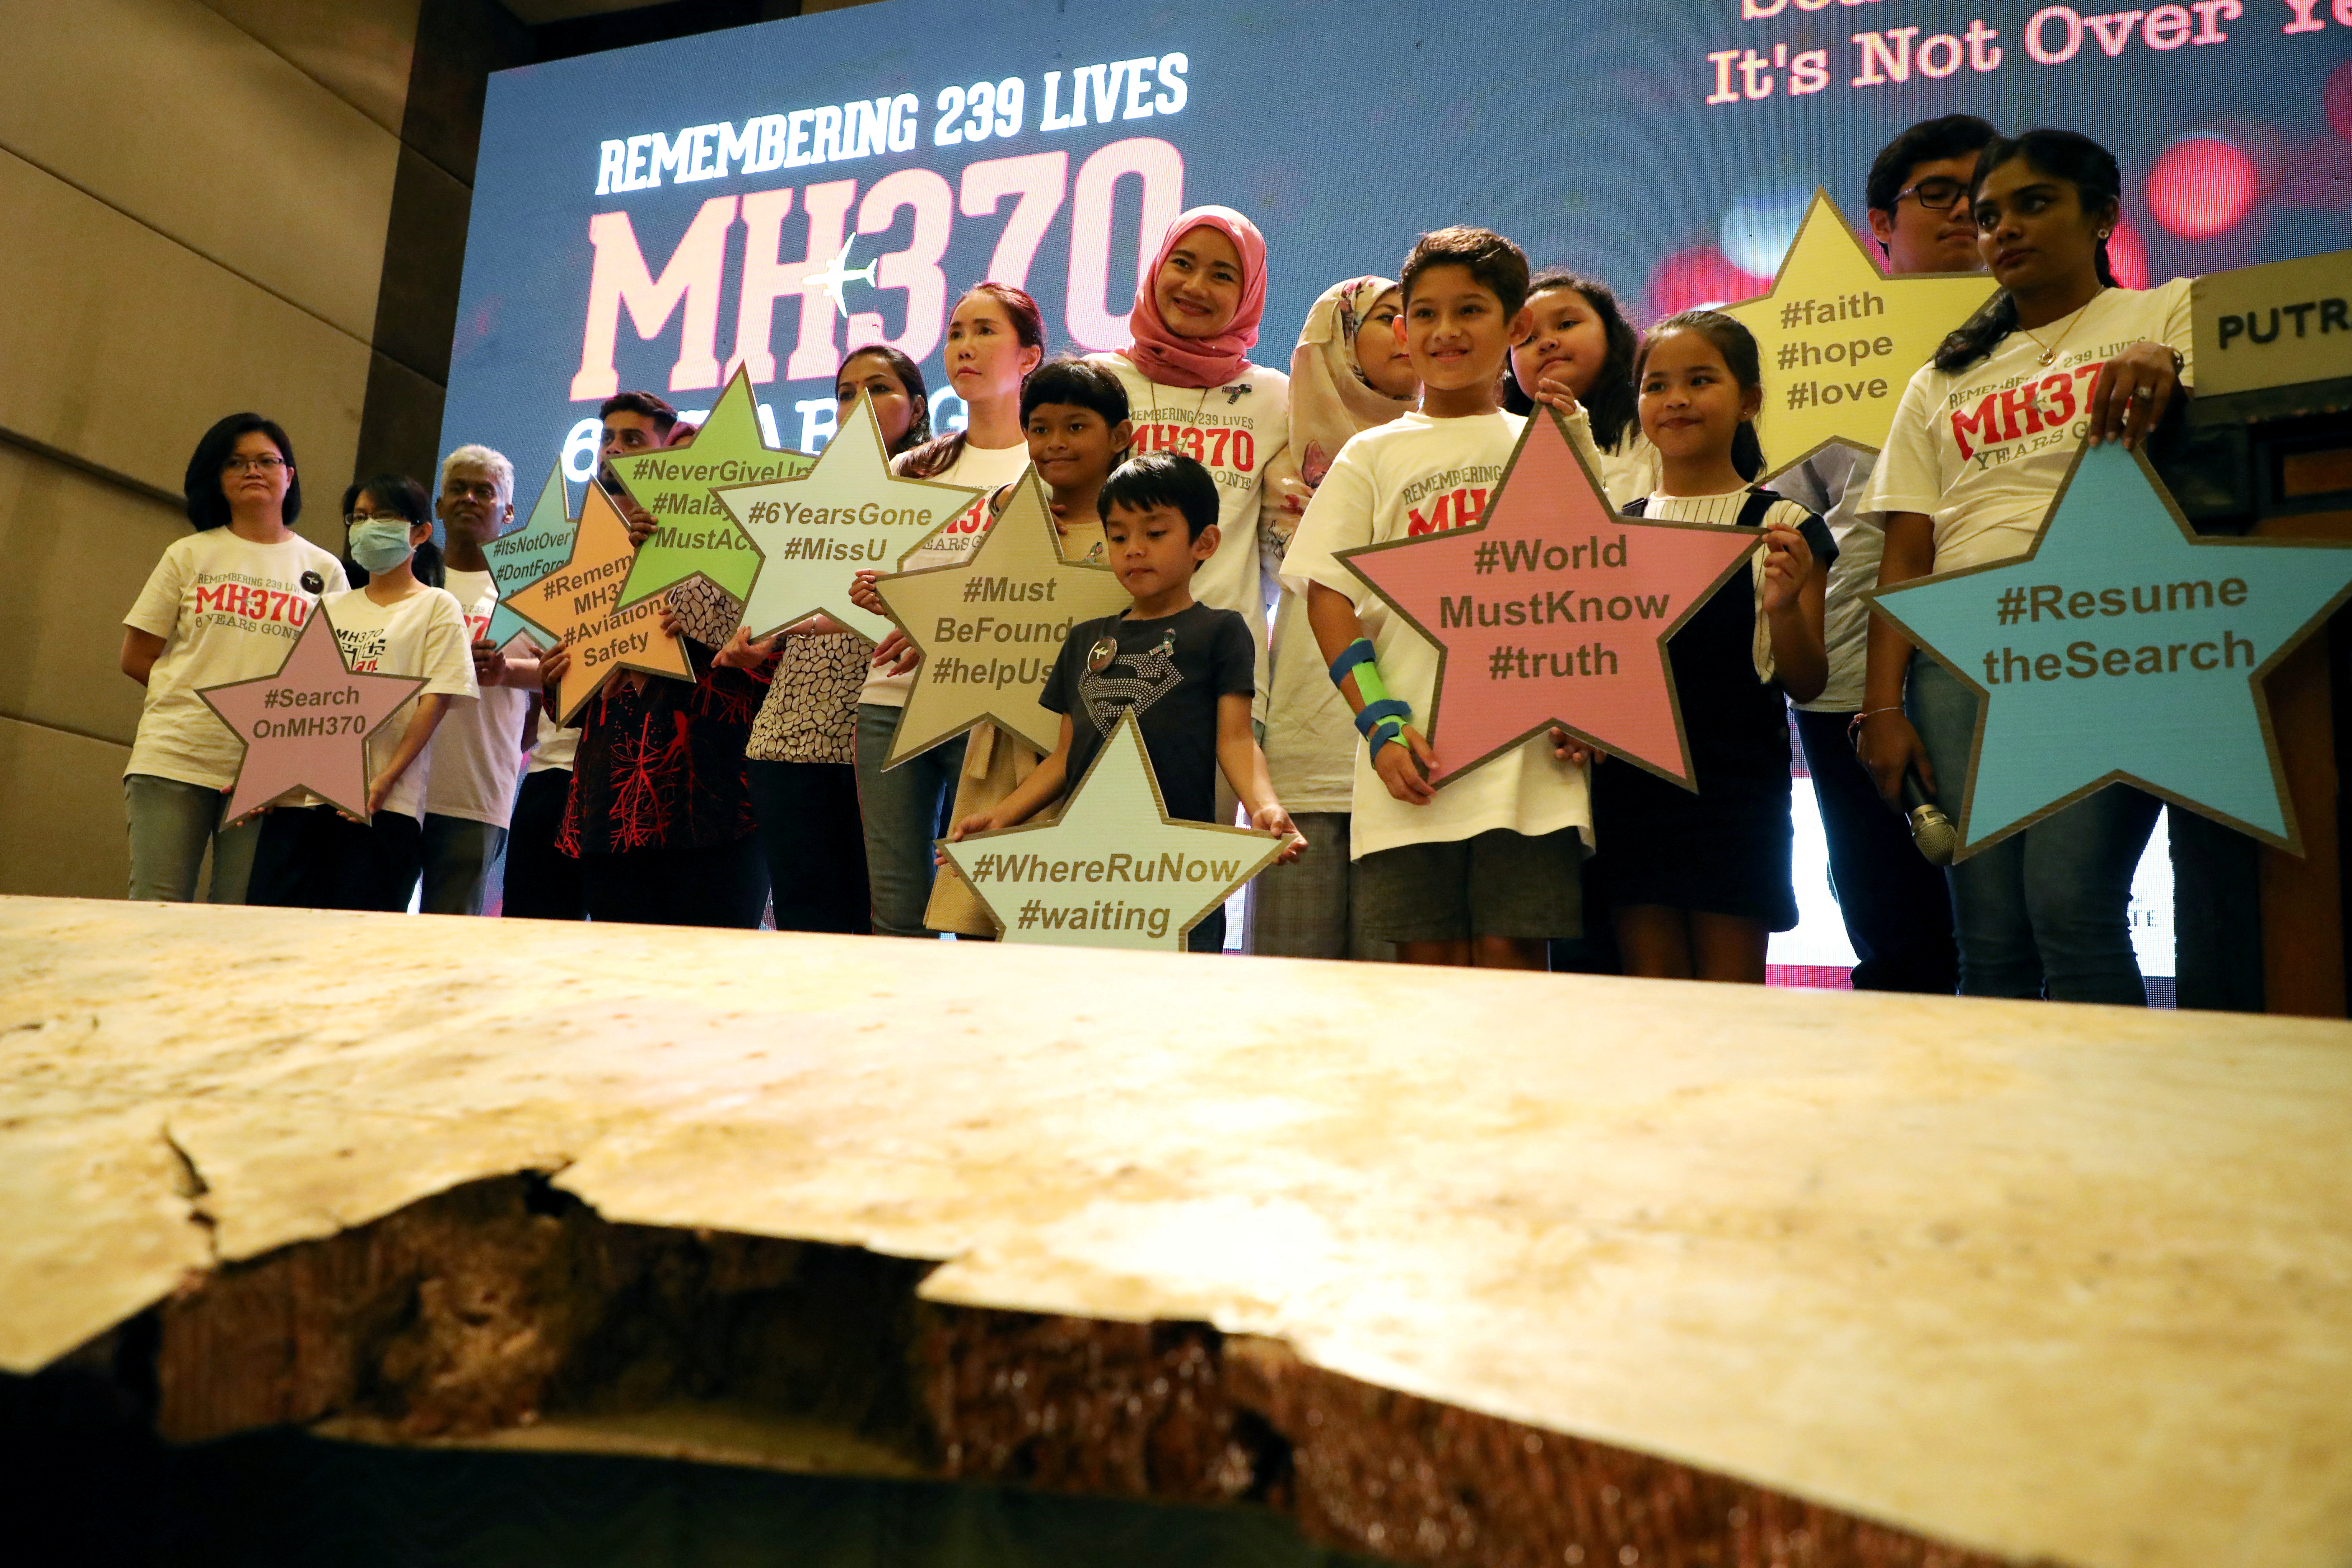 Family members of the victims pose for a group picture with a debris of the missing Malaysia Airlines flight MH370 during its sixth annual remembrance event in Putrajaya